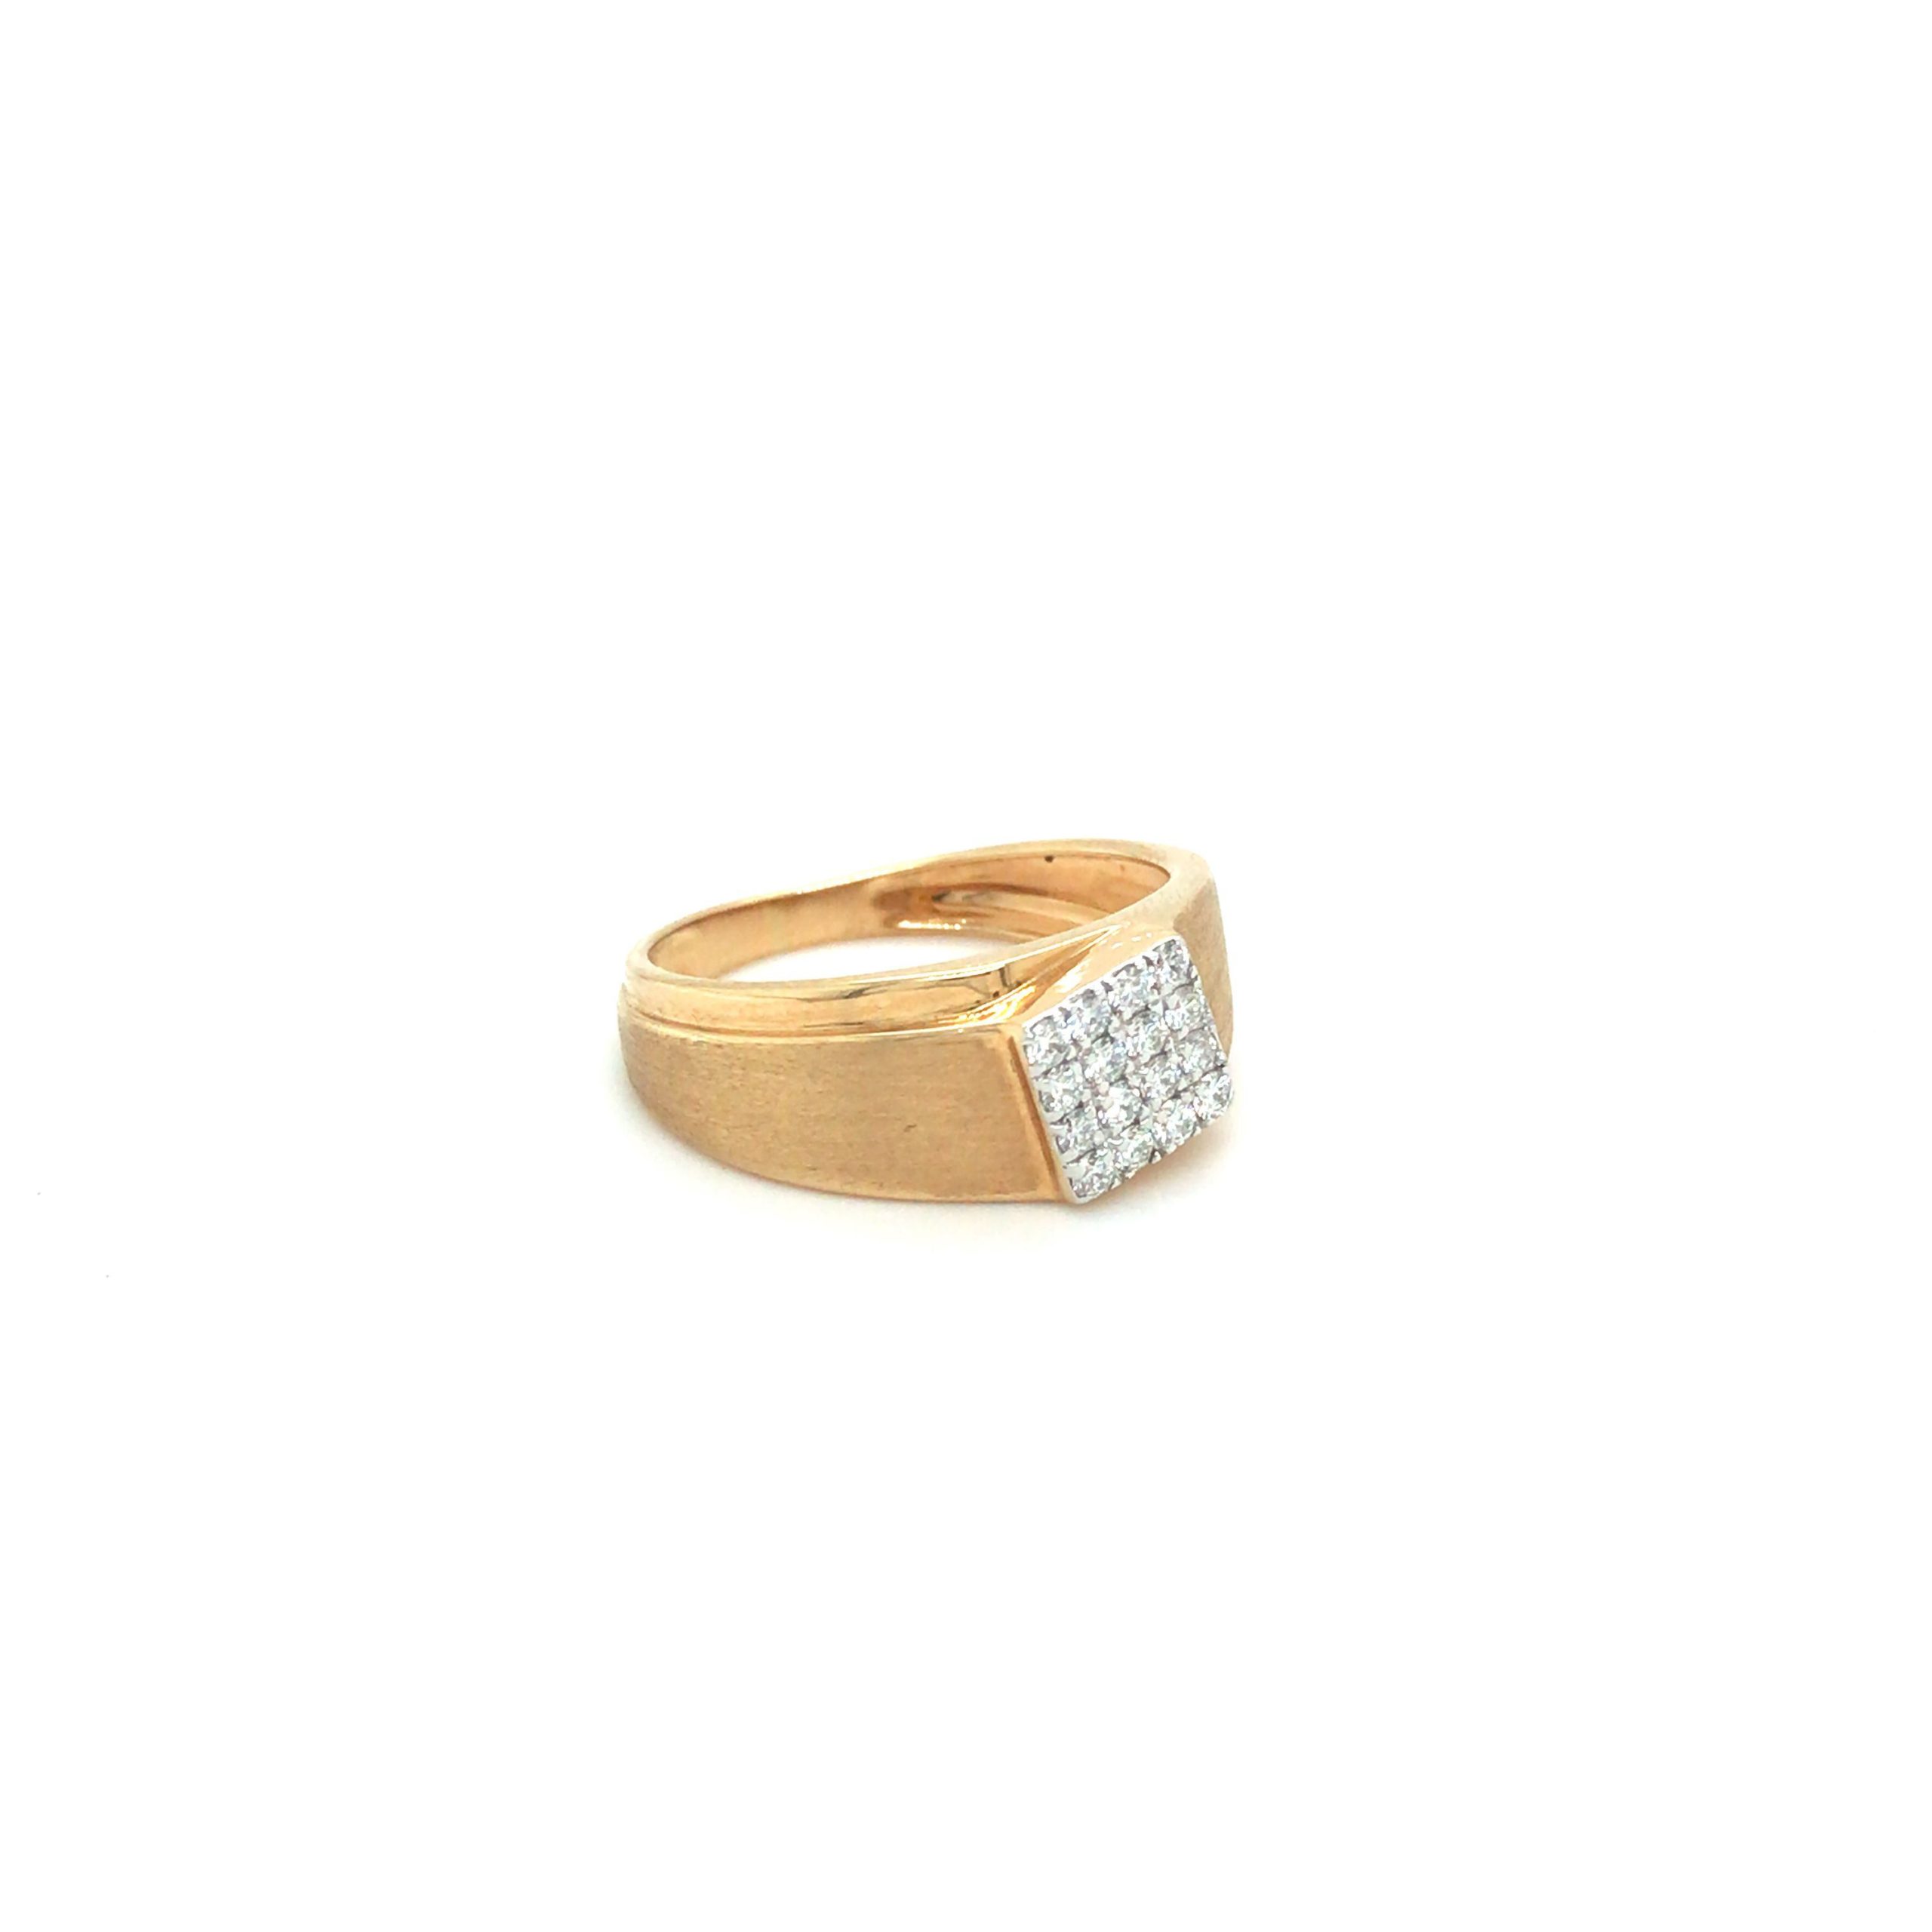 Buy quality New Latest Design Gold Ring For Men in Ahmedabad